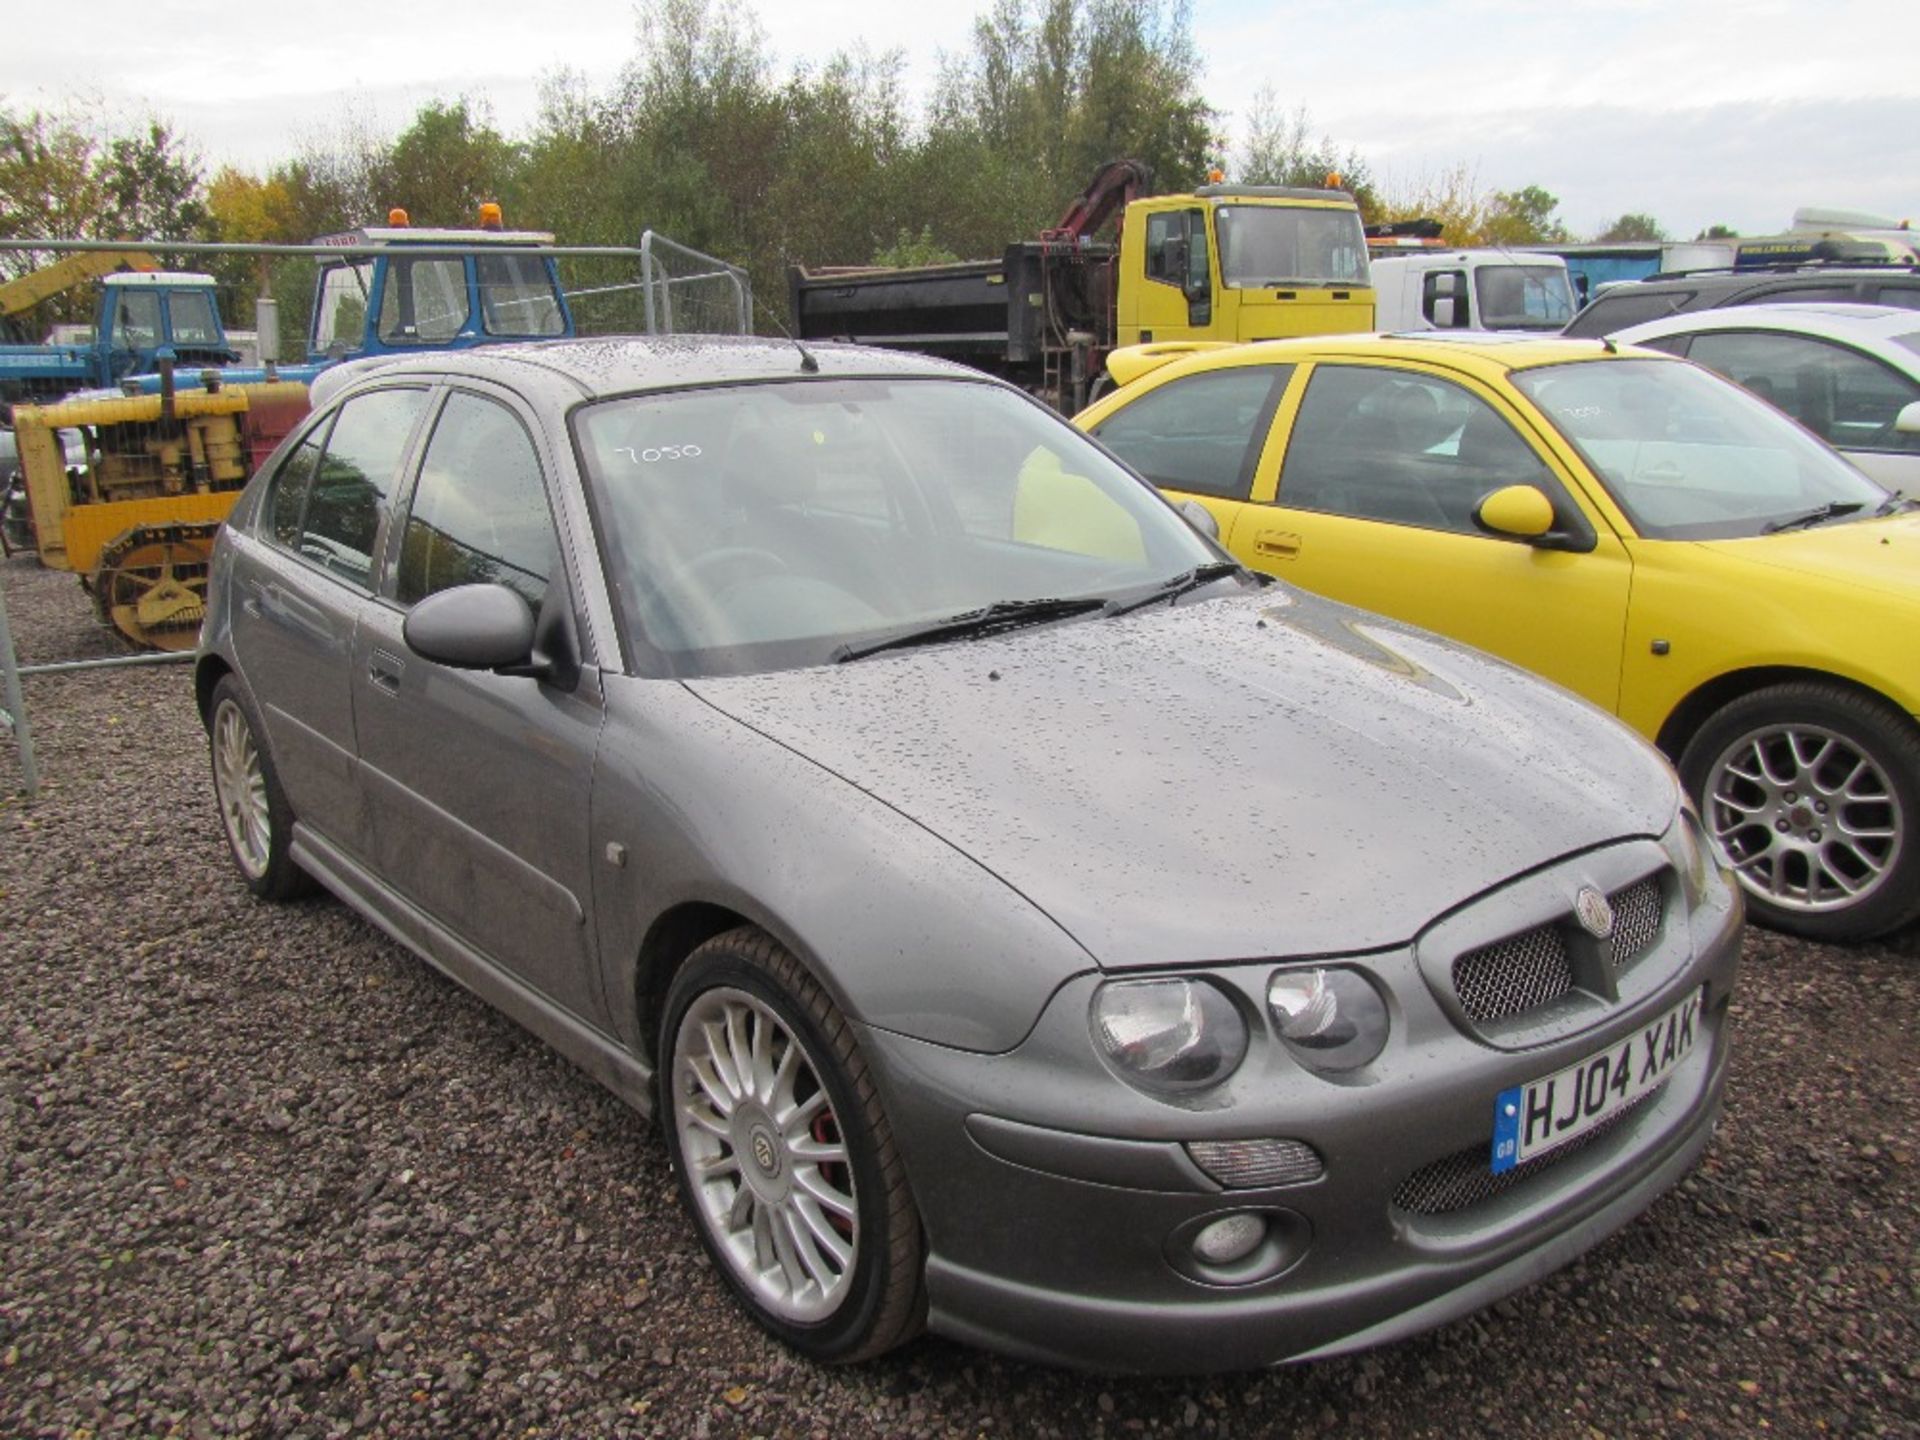 MG ZR 2.0 TD 115 Diesel Manual with Sunroof, Air Con, Half Leather Trim & 17inch Alloy Wheels. 3 - Image 2 of 5